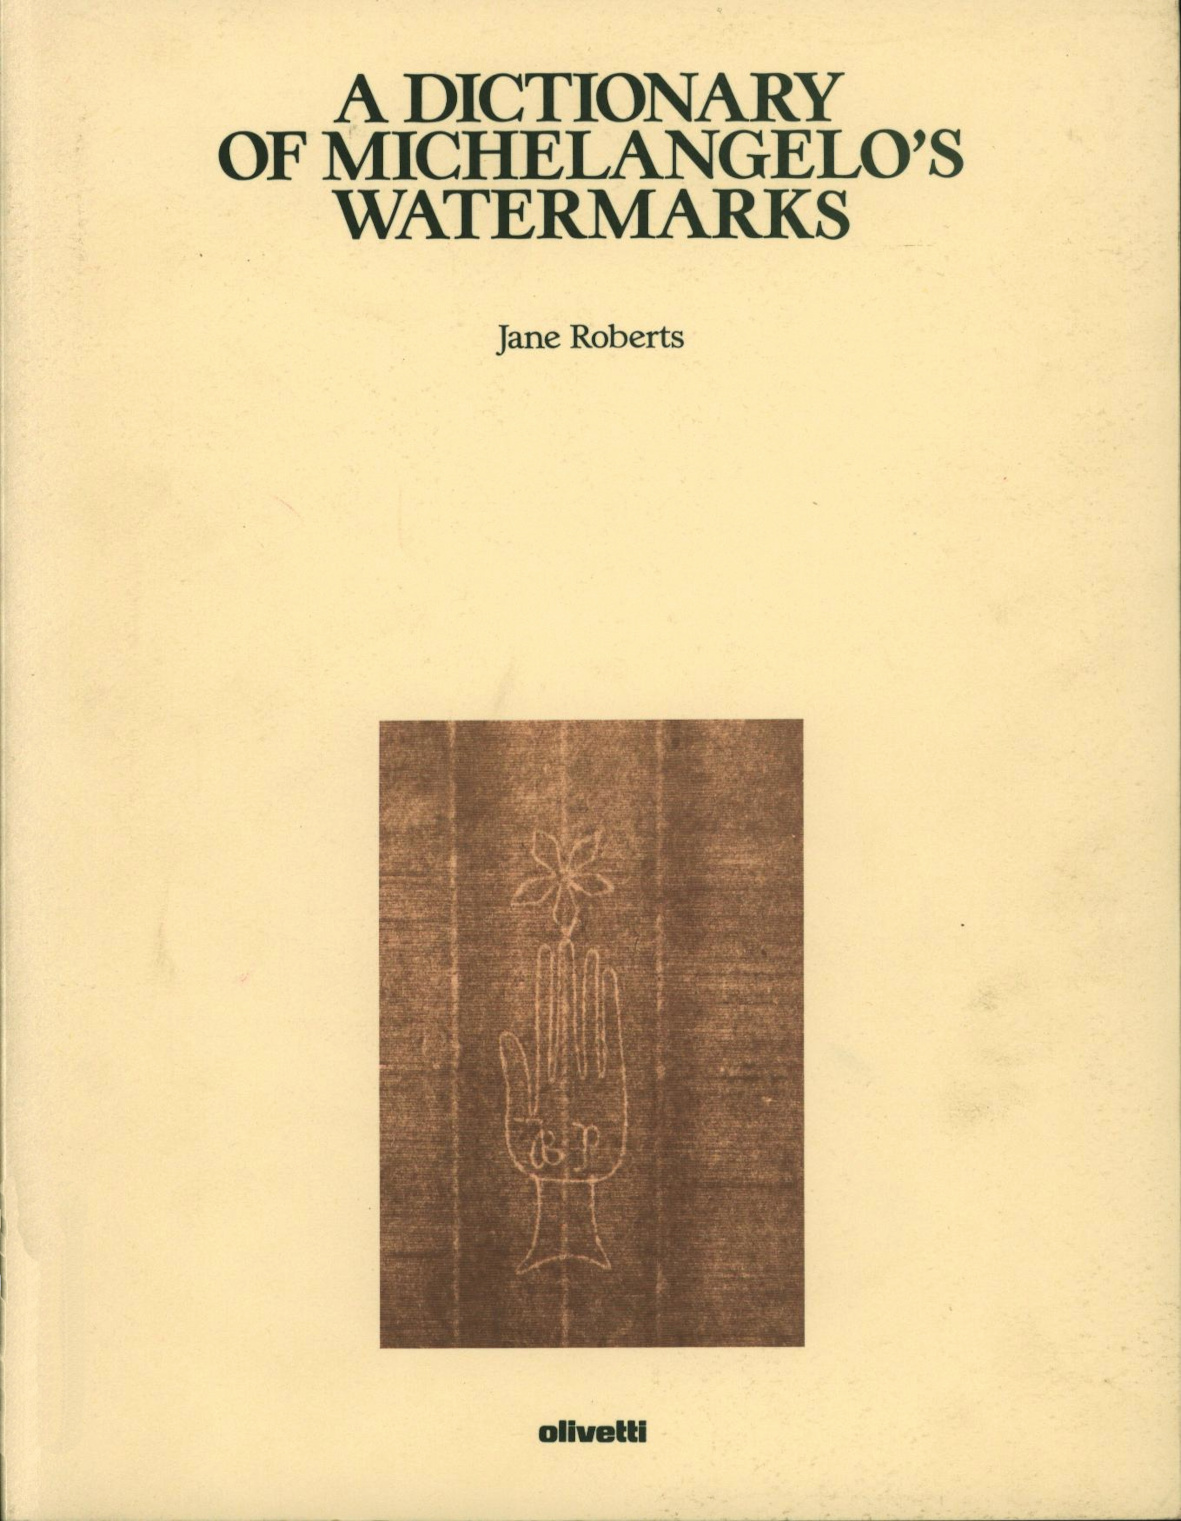 A Dictionary of Michelangelo’s watermarks